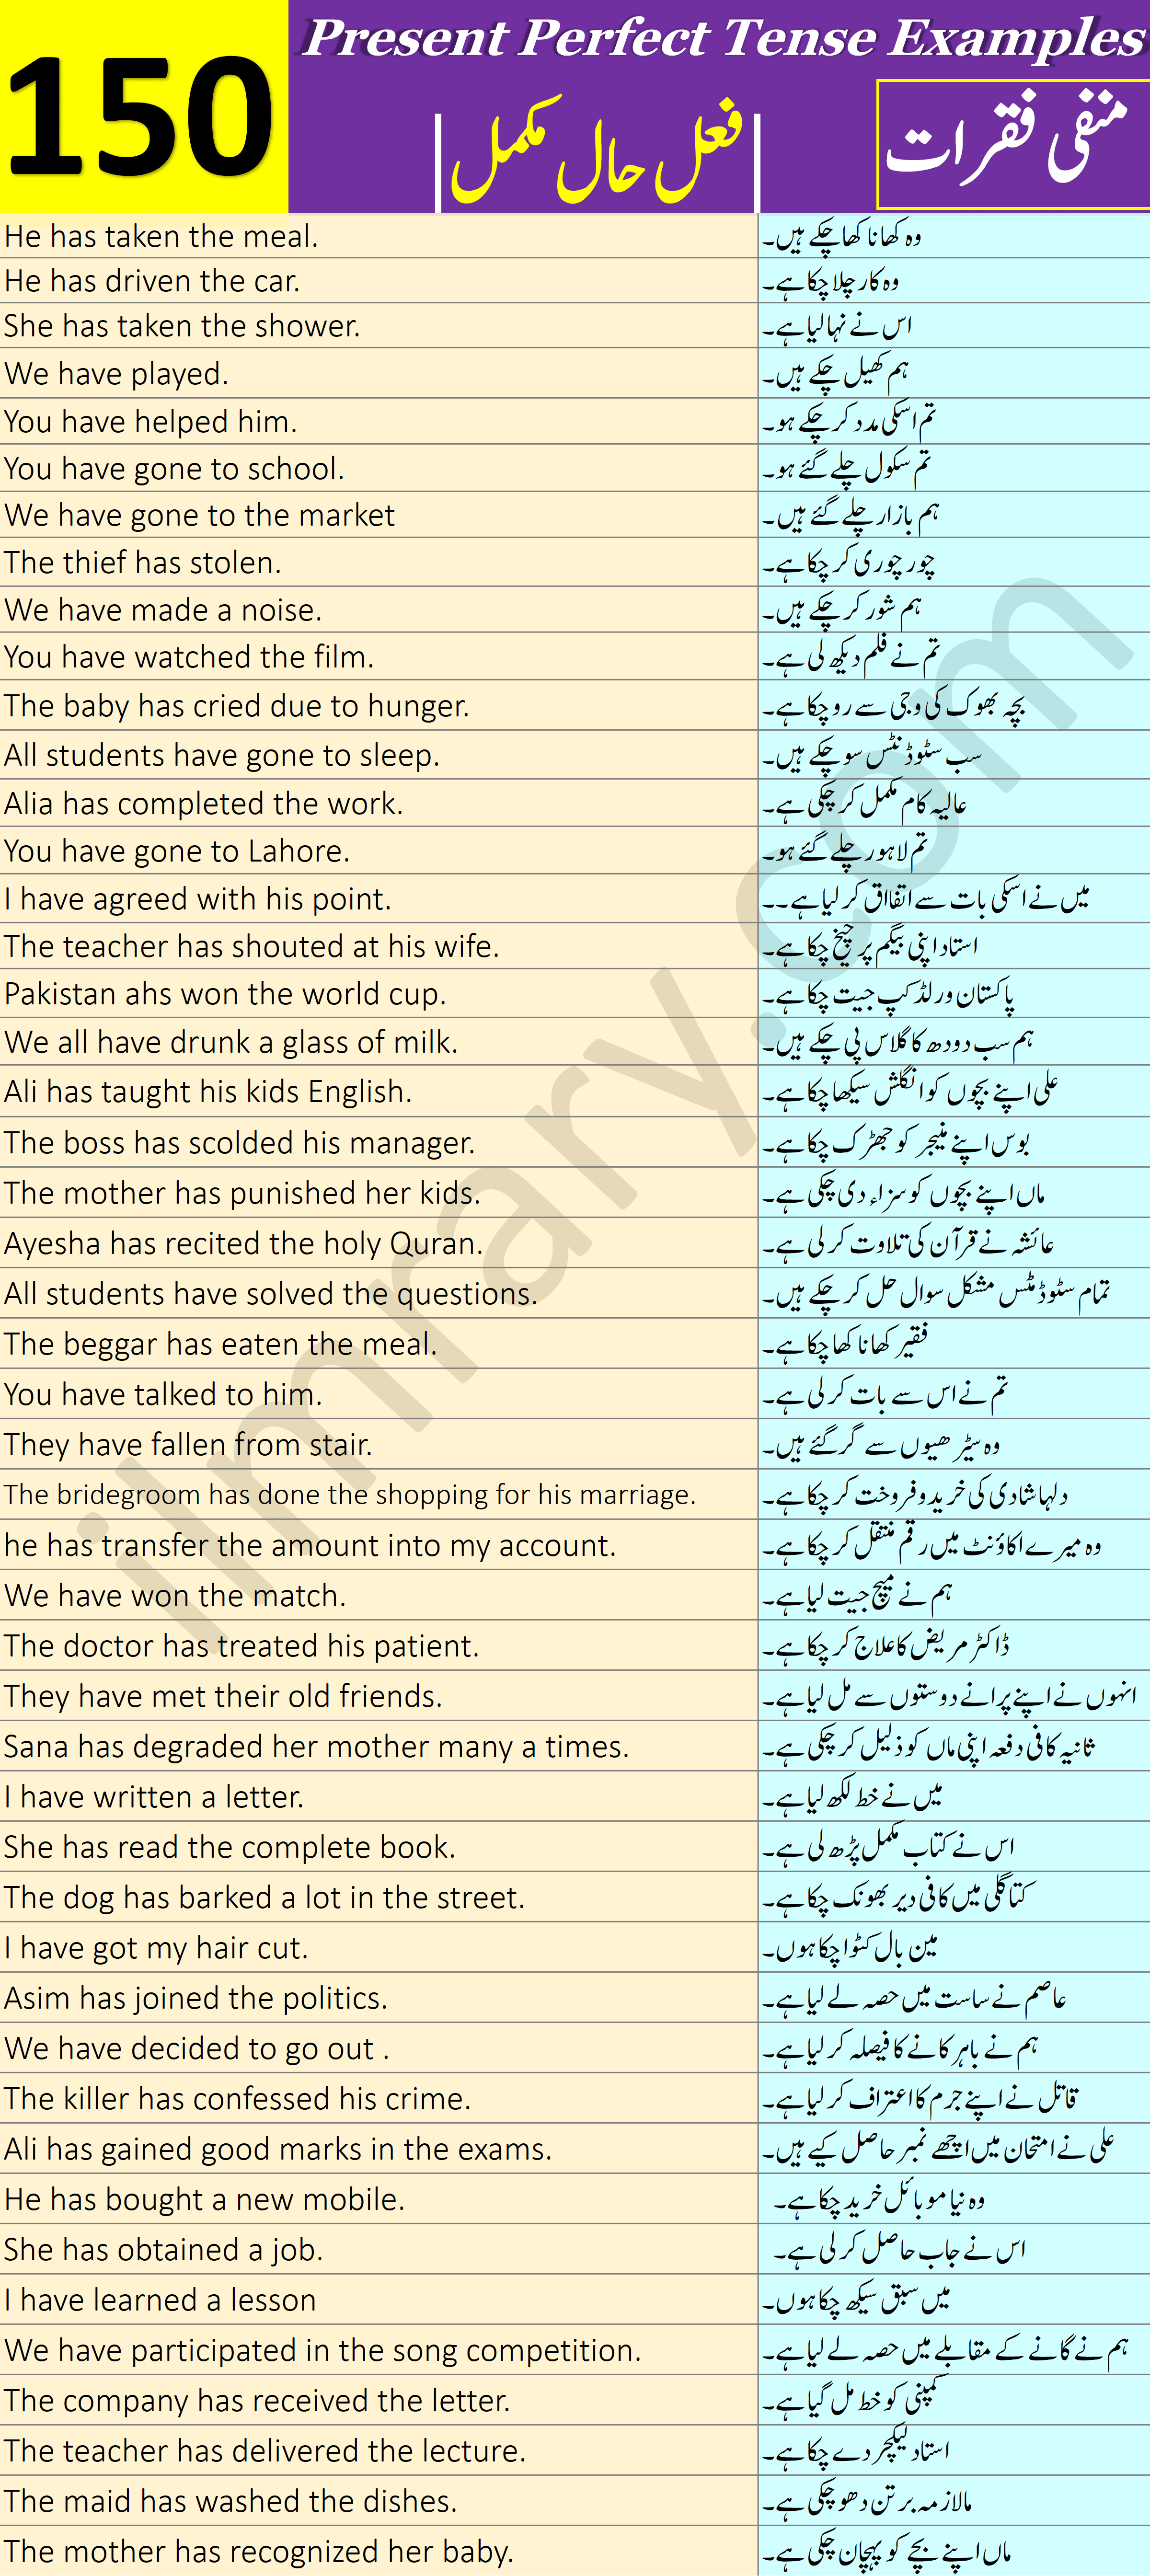 150 Positive Example Sentences For Present Perfect Tense With Urdu Translation